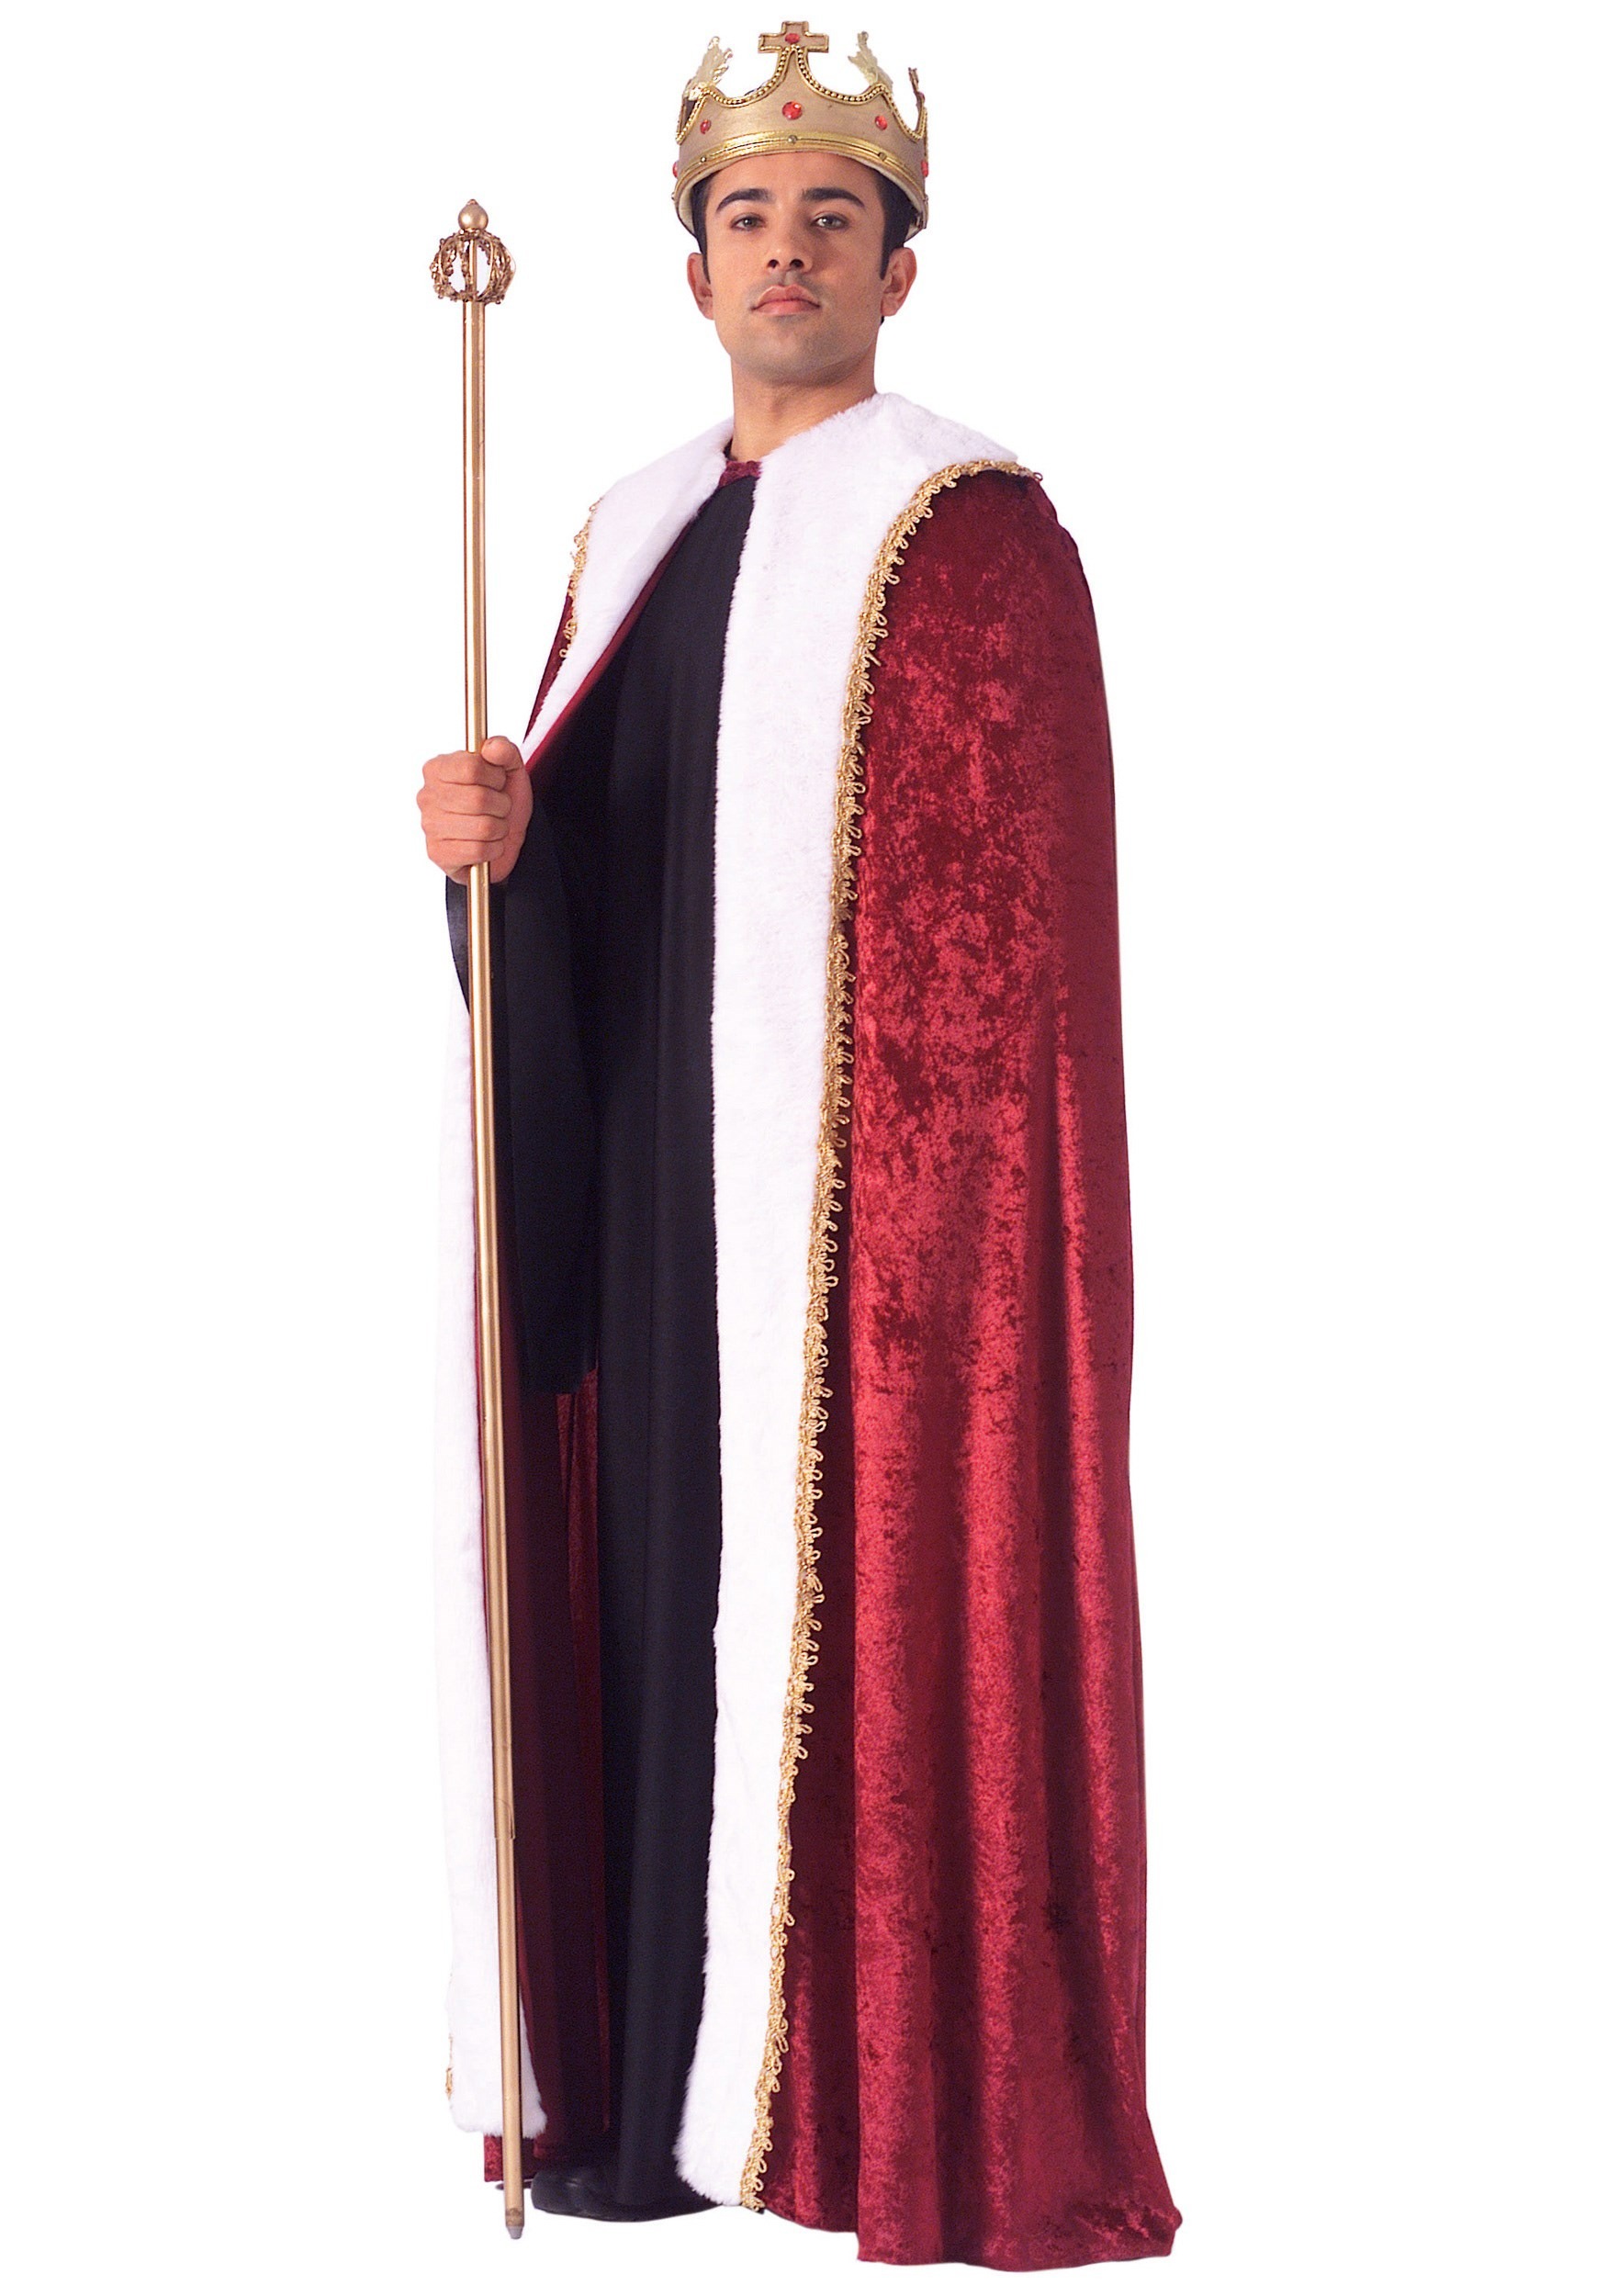 King of Hearts Robe Costume for Men